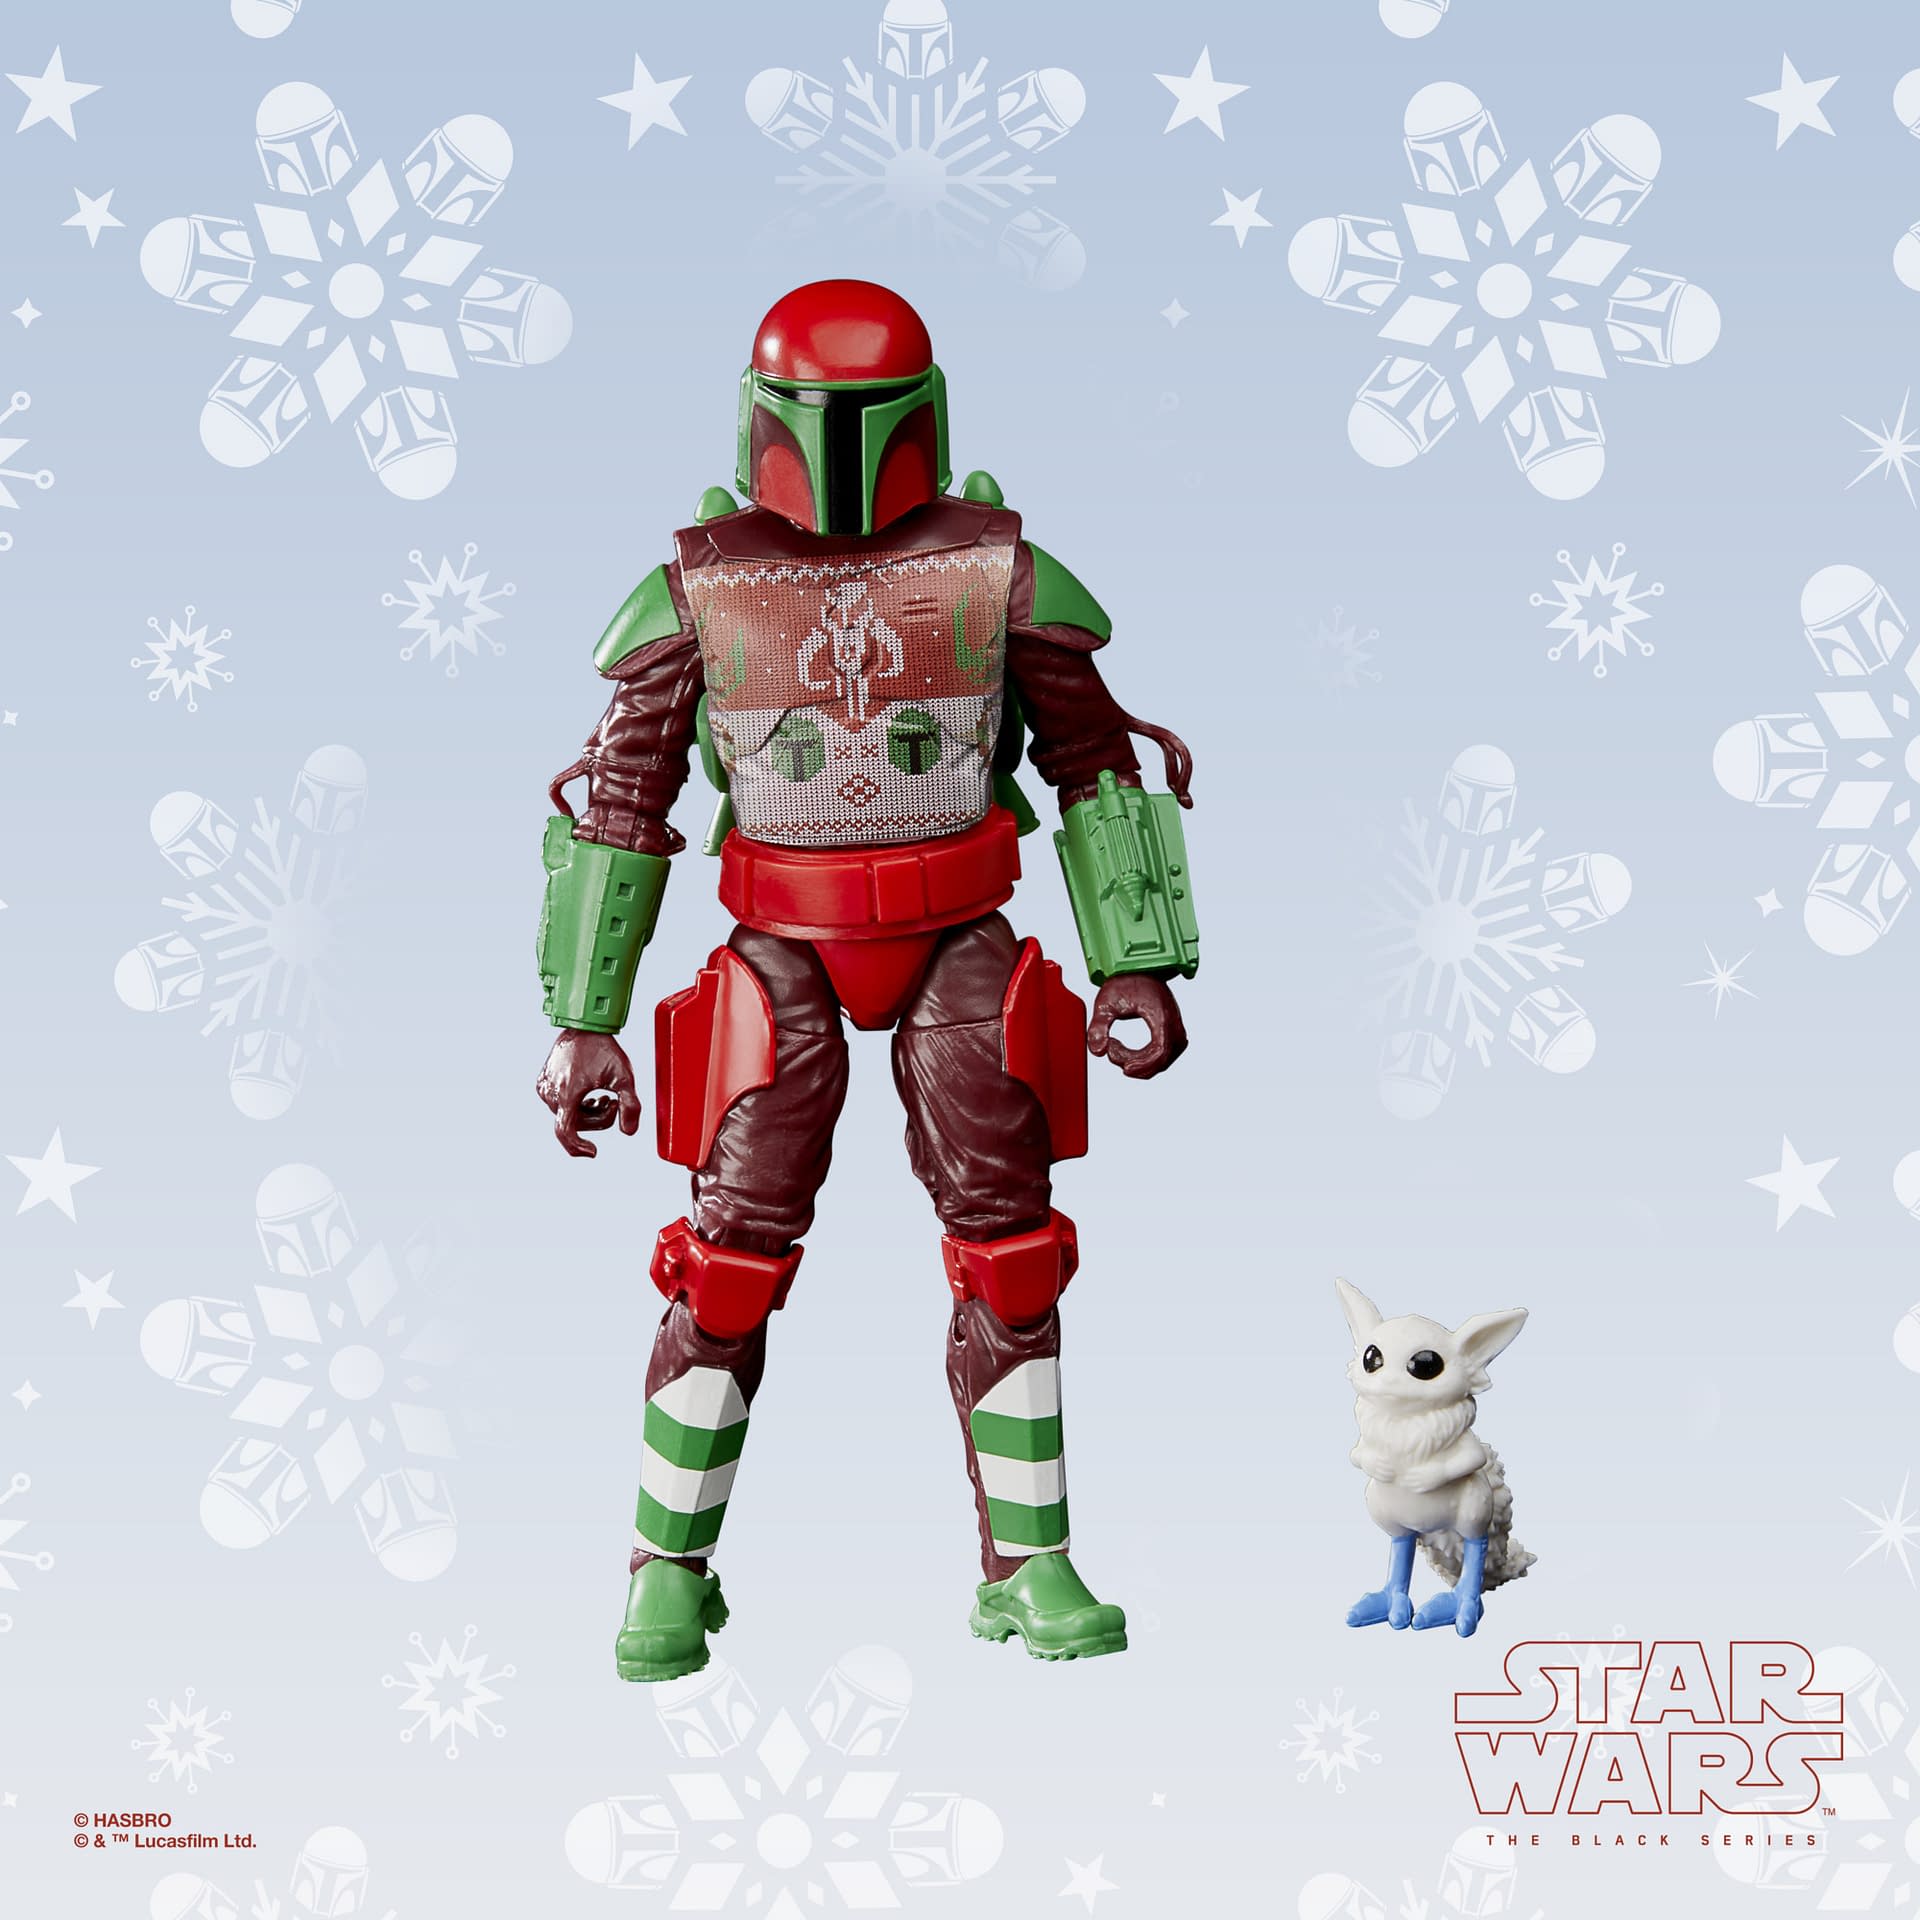 Star Wars Holiday Cheer Hits Mandalore with New Holiday Edition Figure 